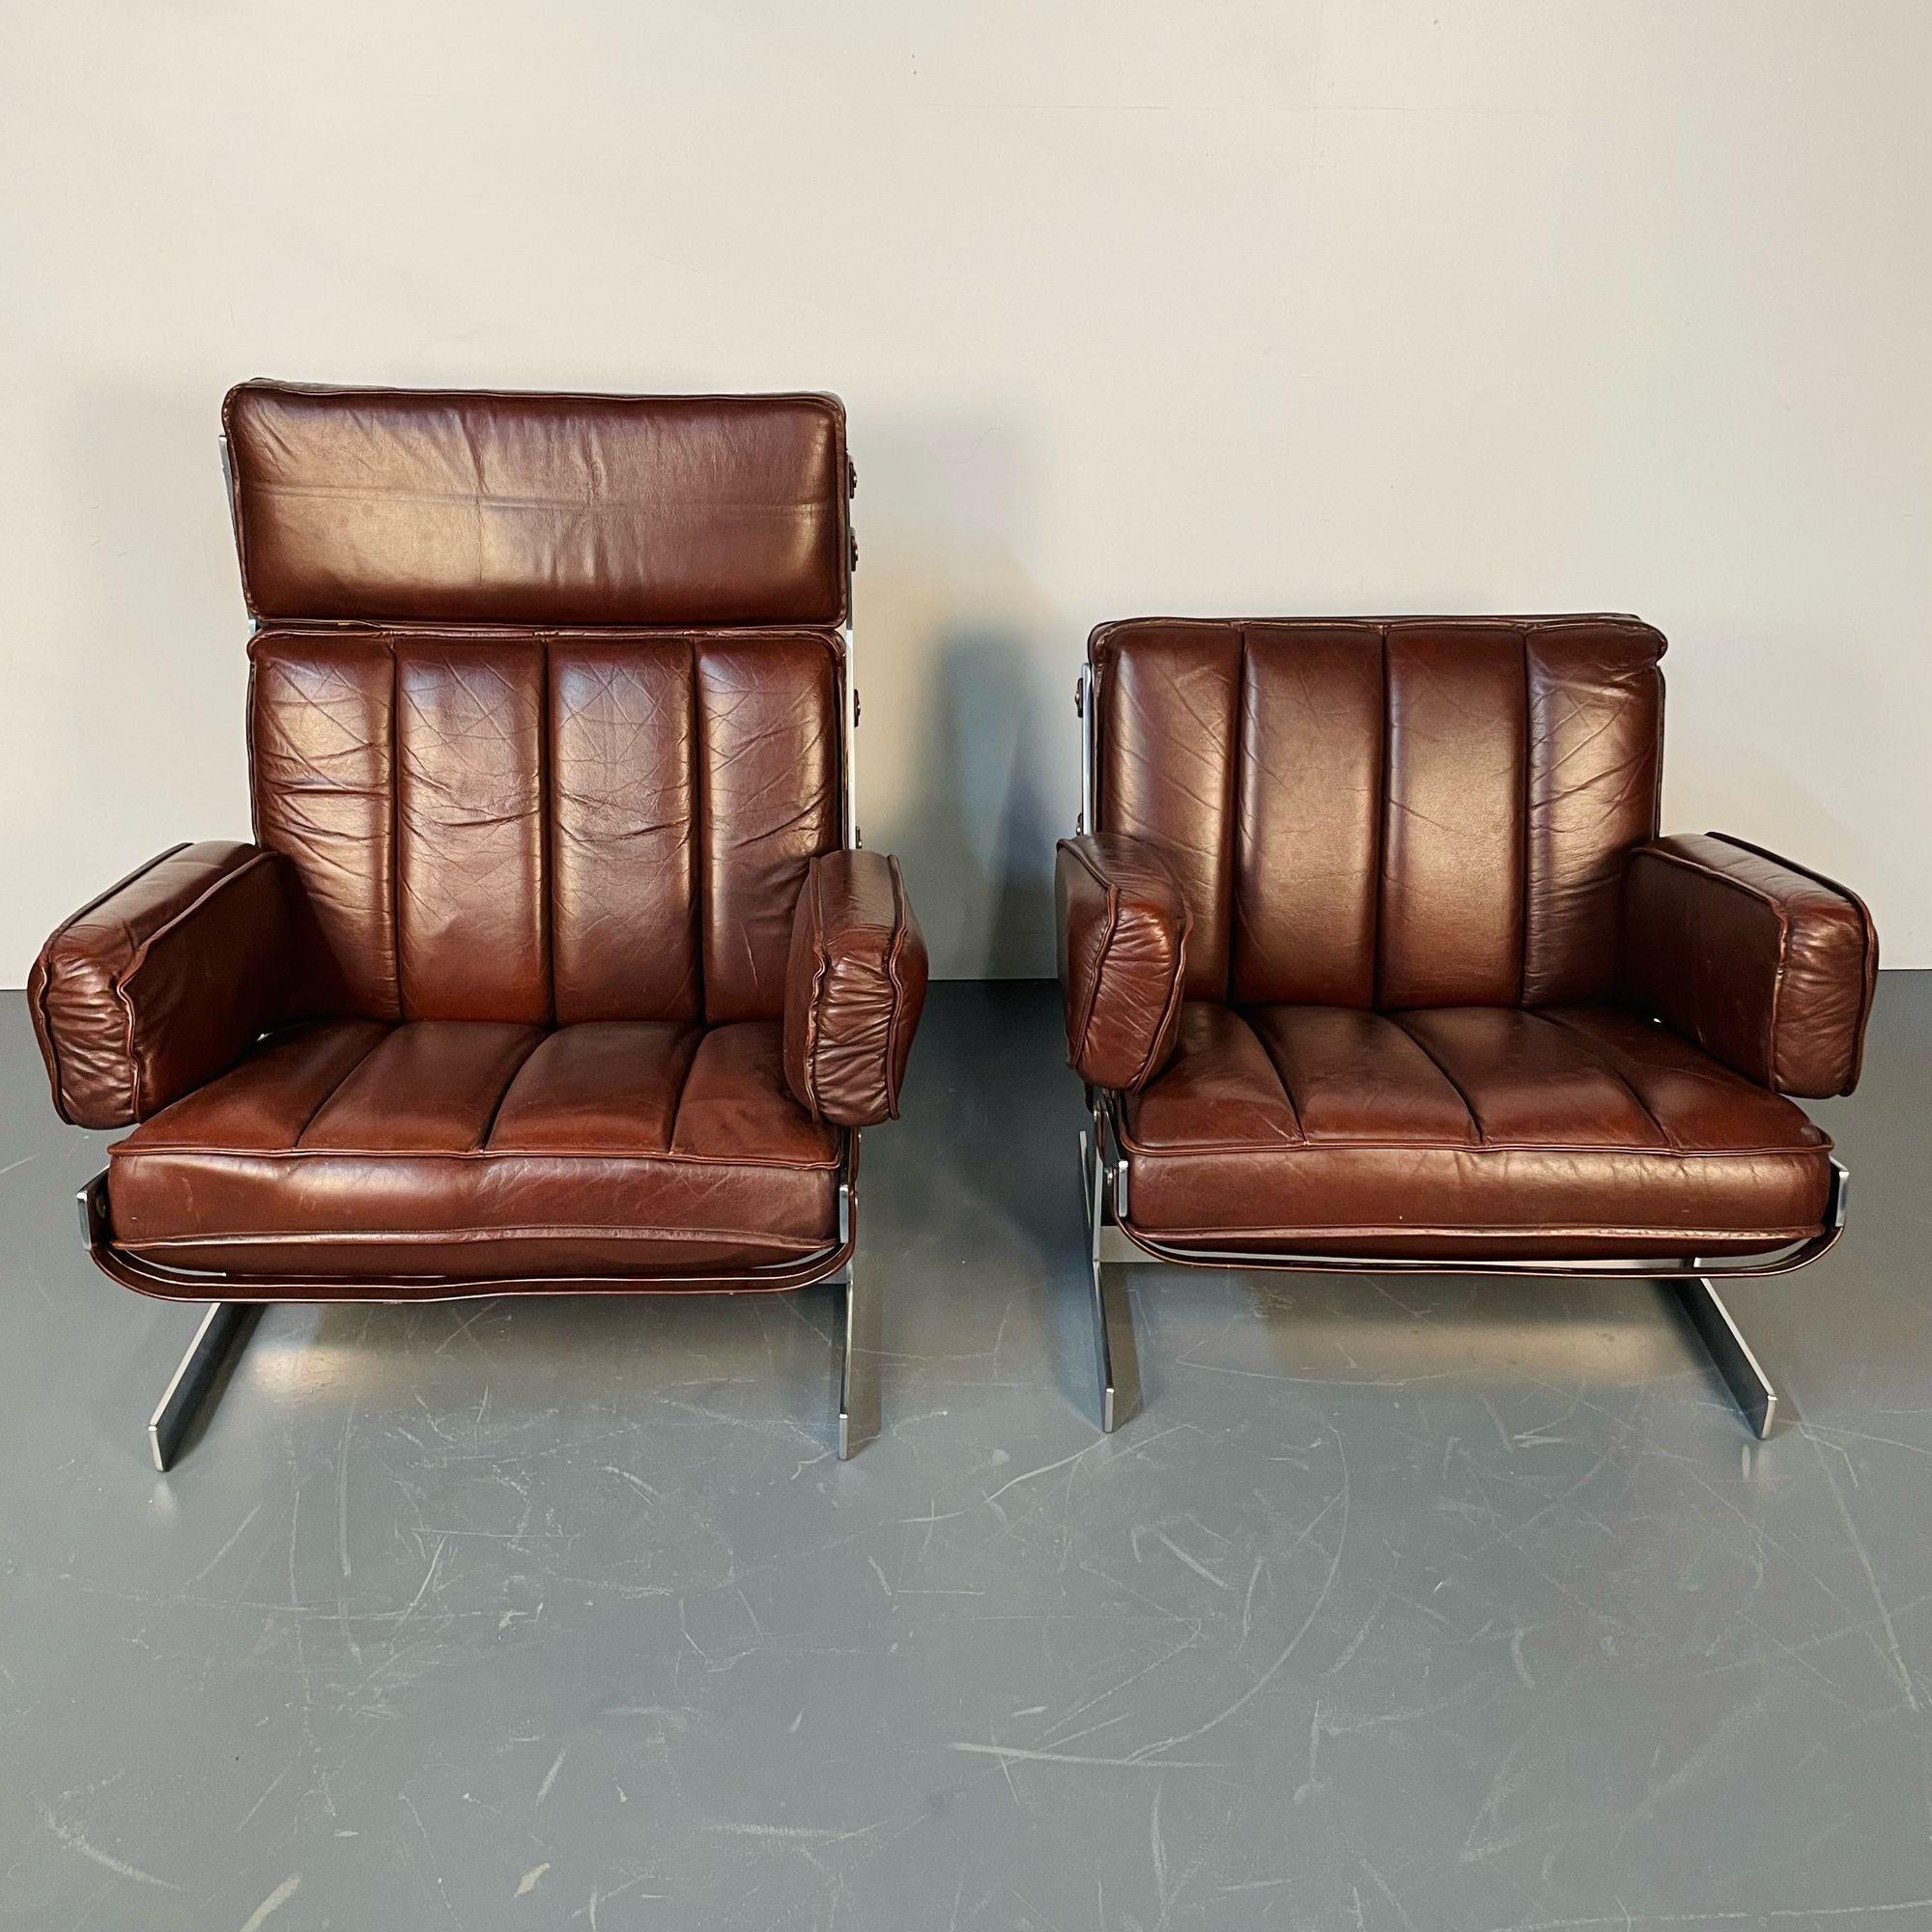 Arne Norell, Swedish Mid-Century Modern Lounge Chairs, Leather, Steel, 1960s For Sale 1